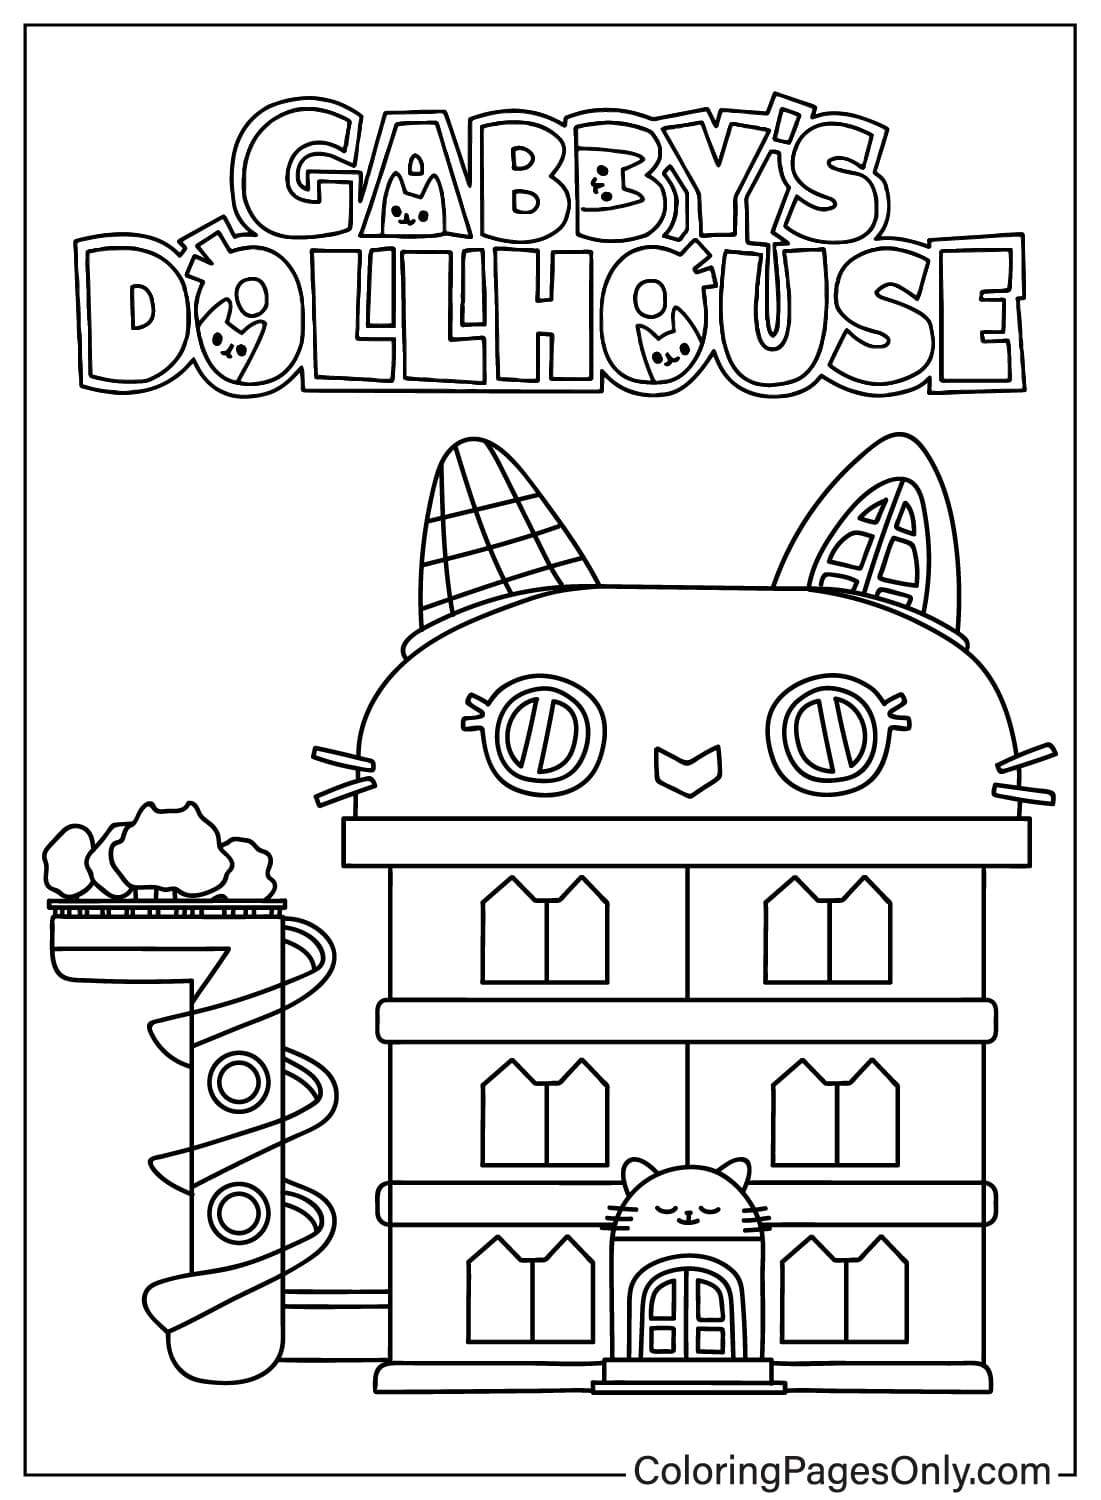 18+ Gabby'S Dollhouse Coloring